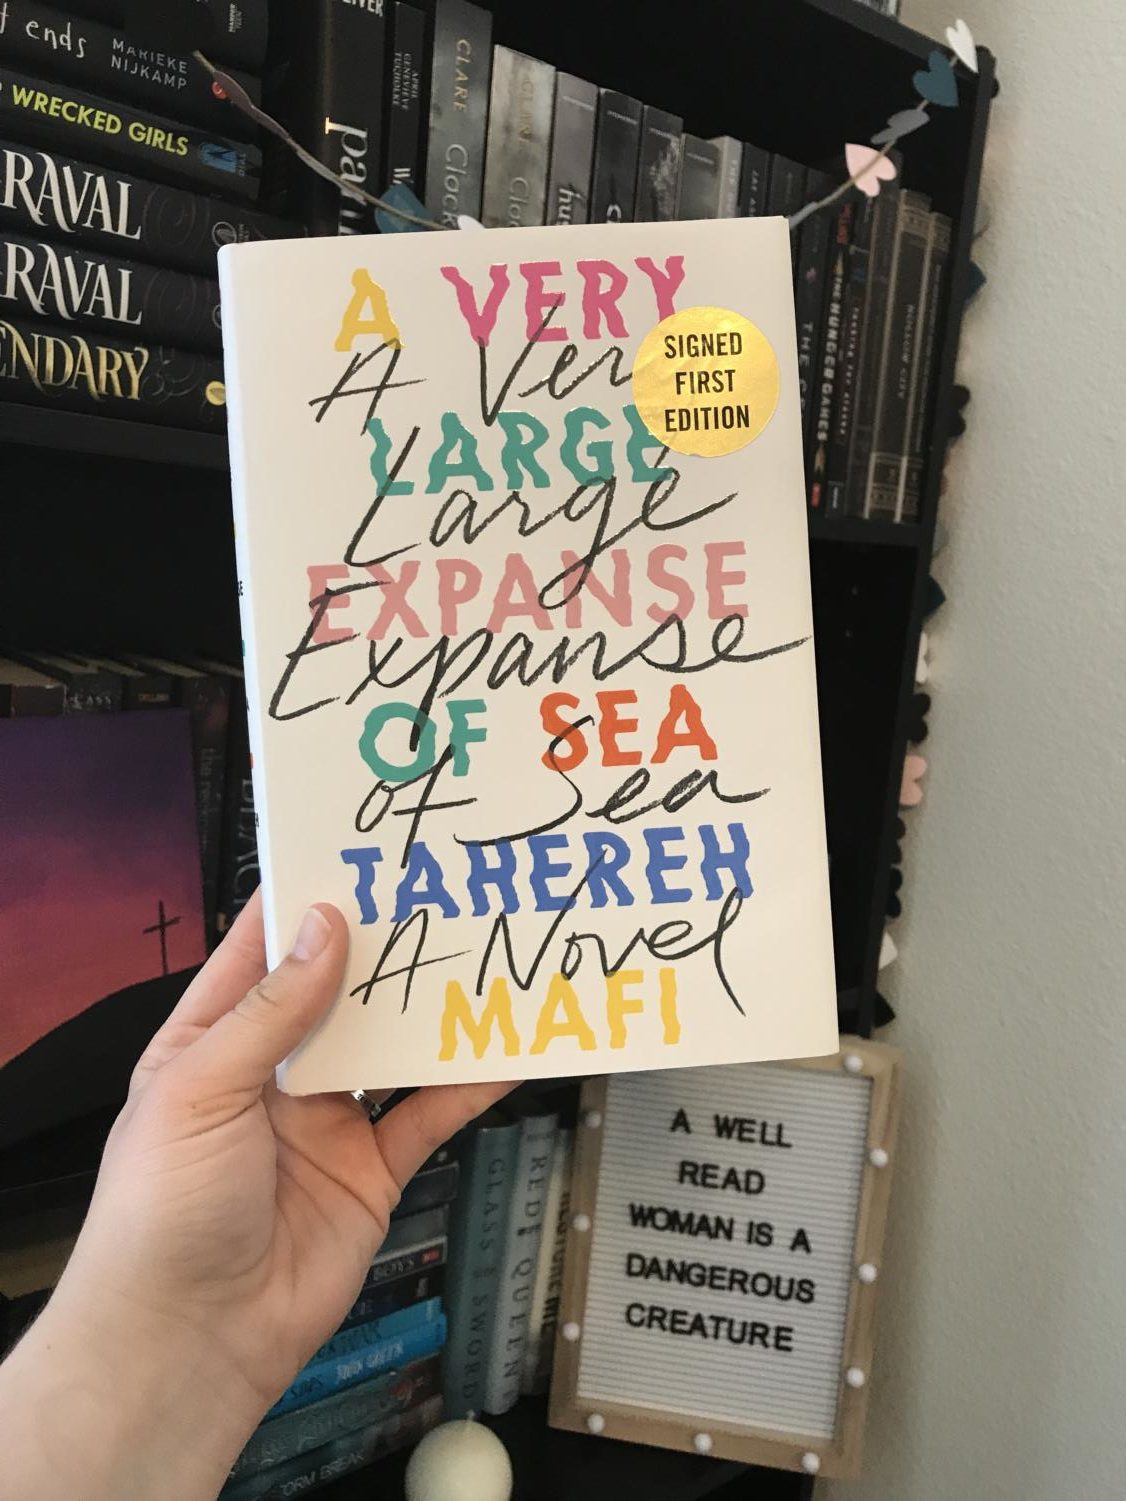 a very large expanse of sea ending